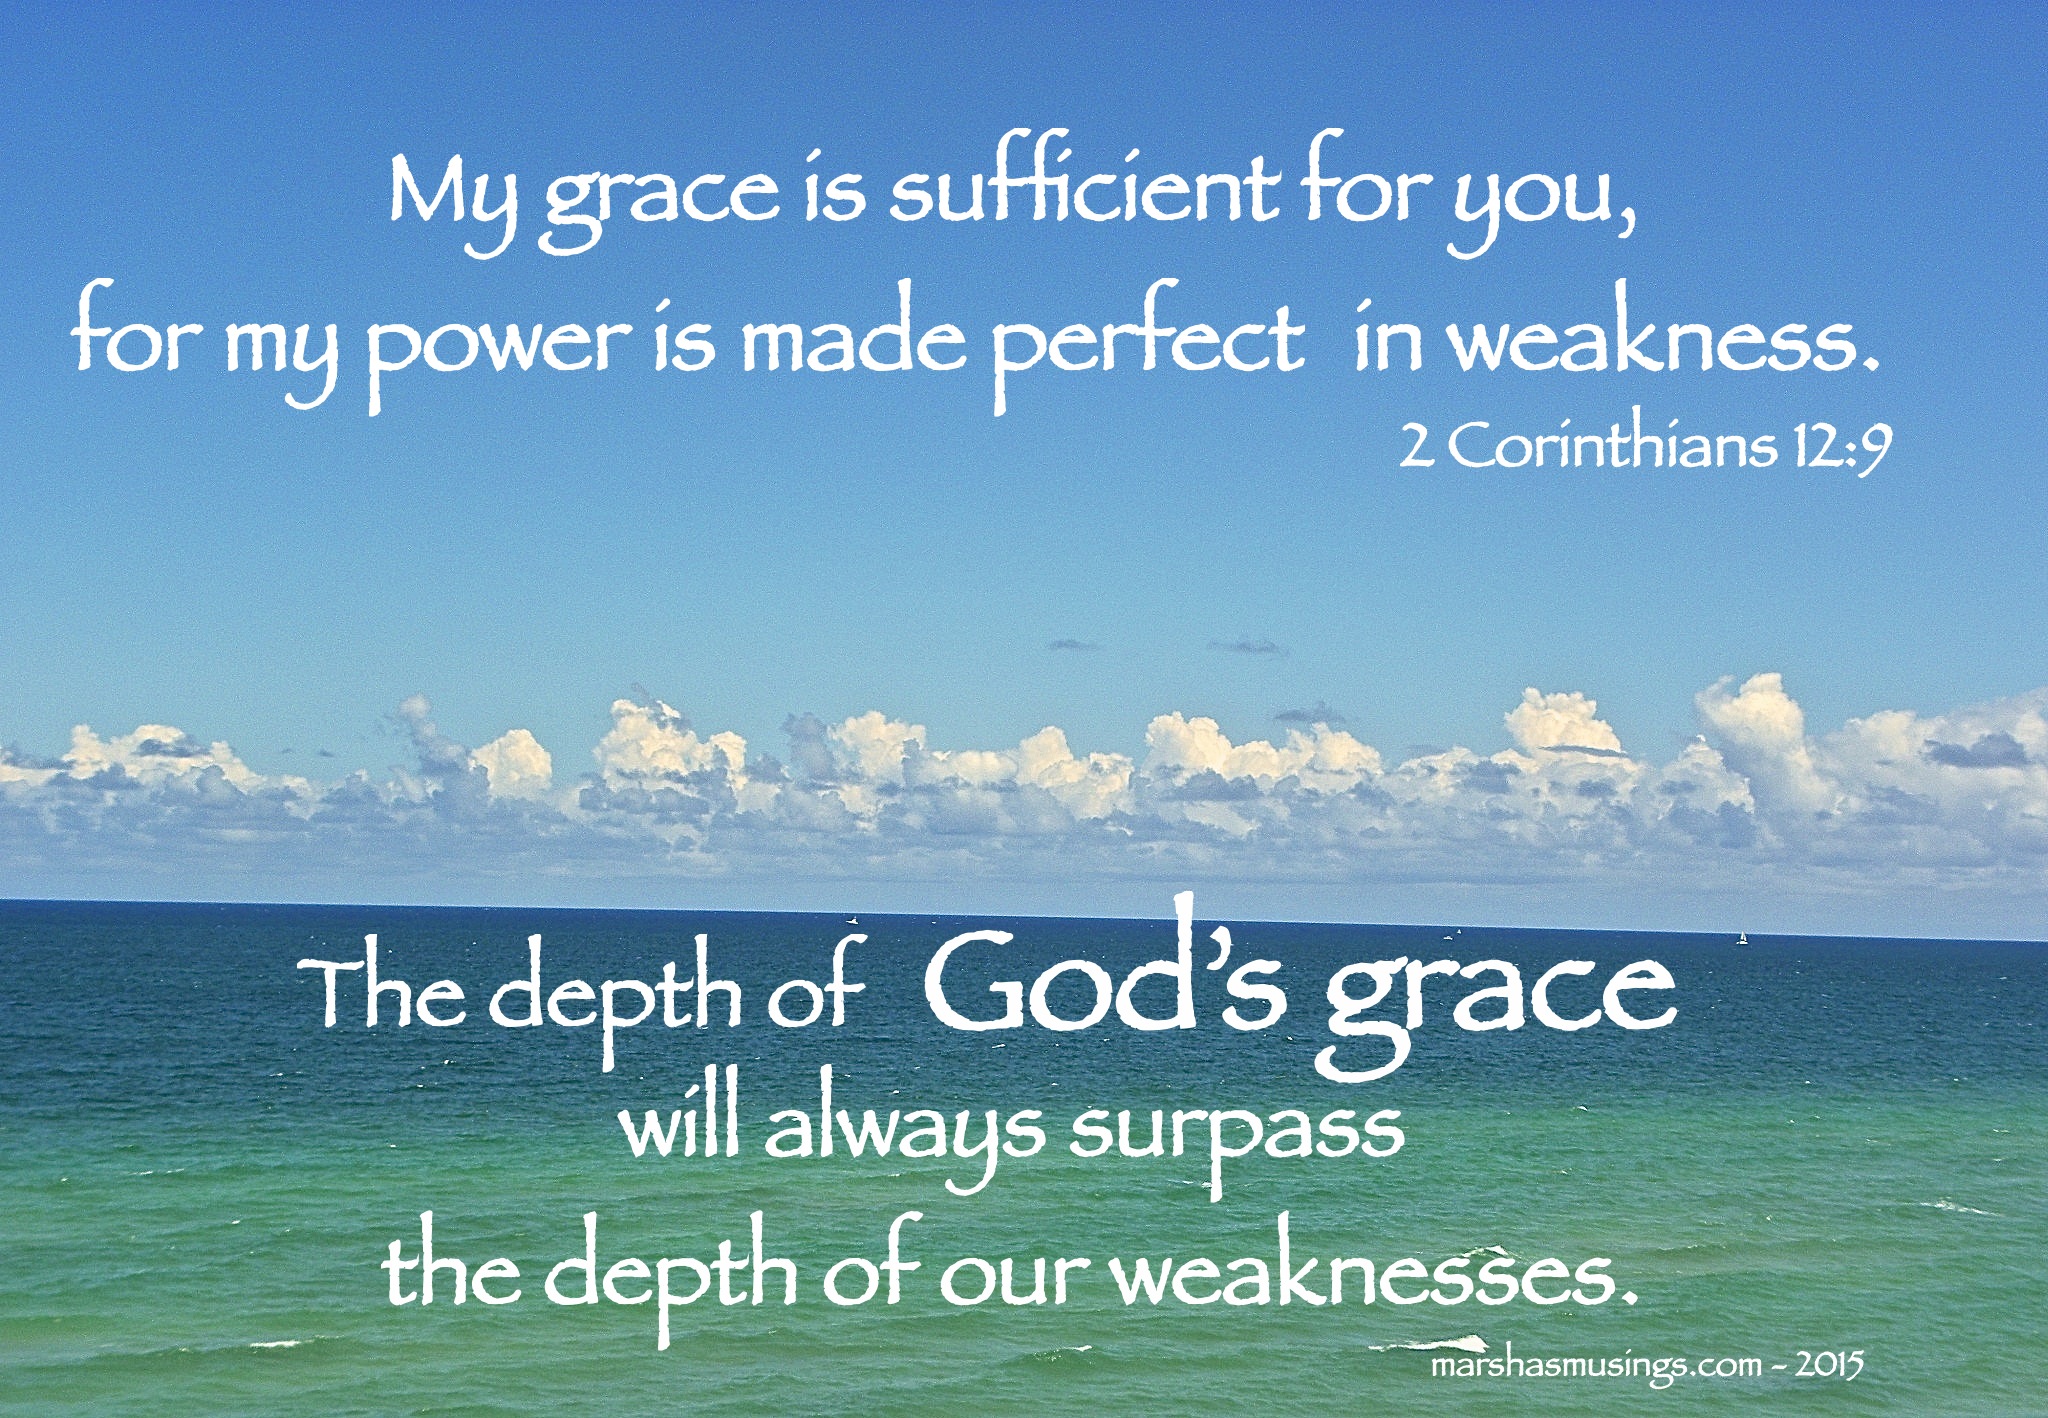 All-Sufficient-Grace.jpg